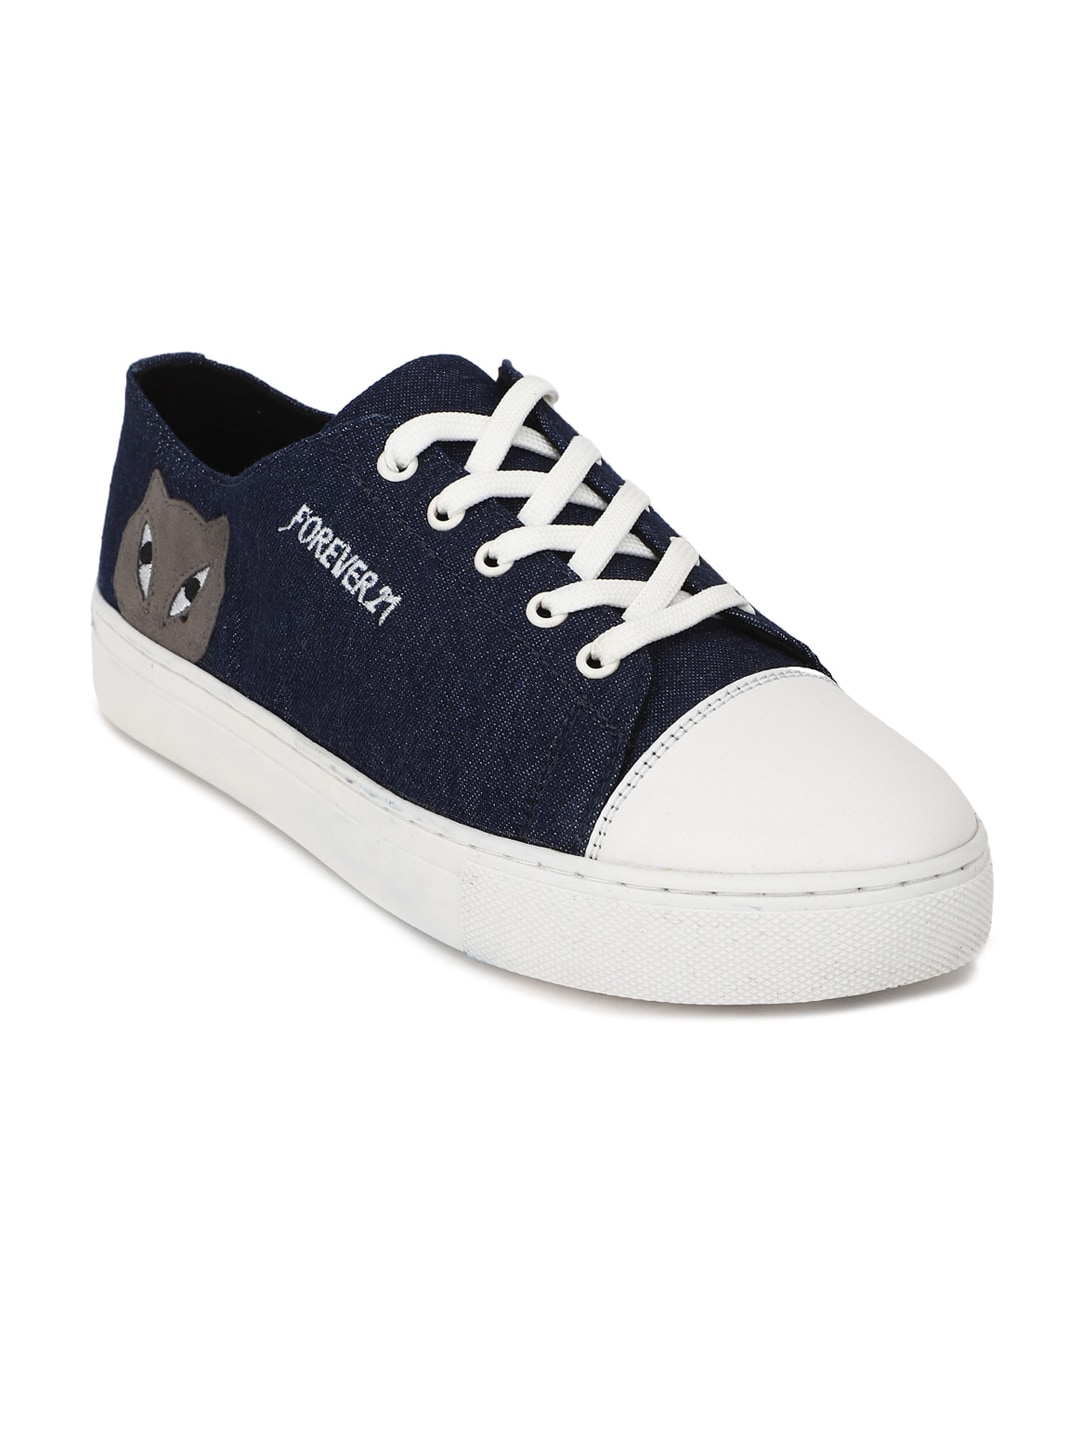 FOREVER 21 Women Navy Blue & White Colourblocked Sneakers Price in India